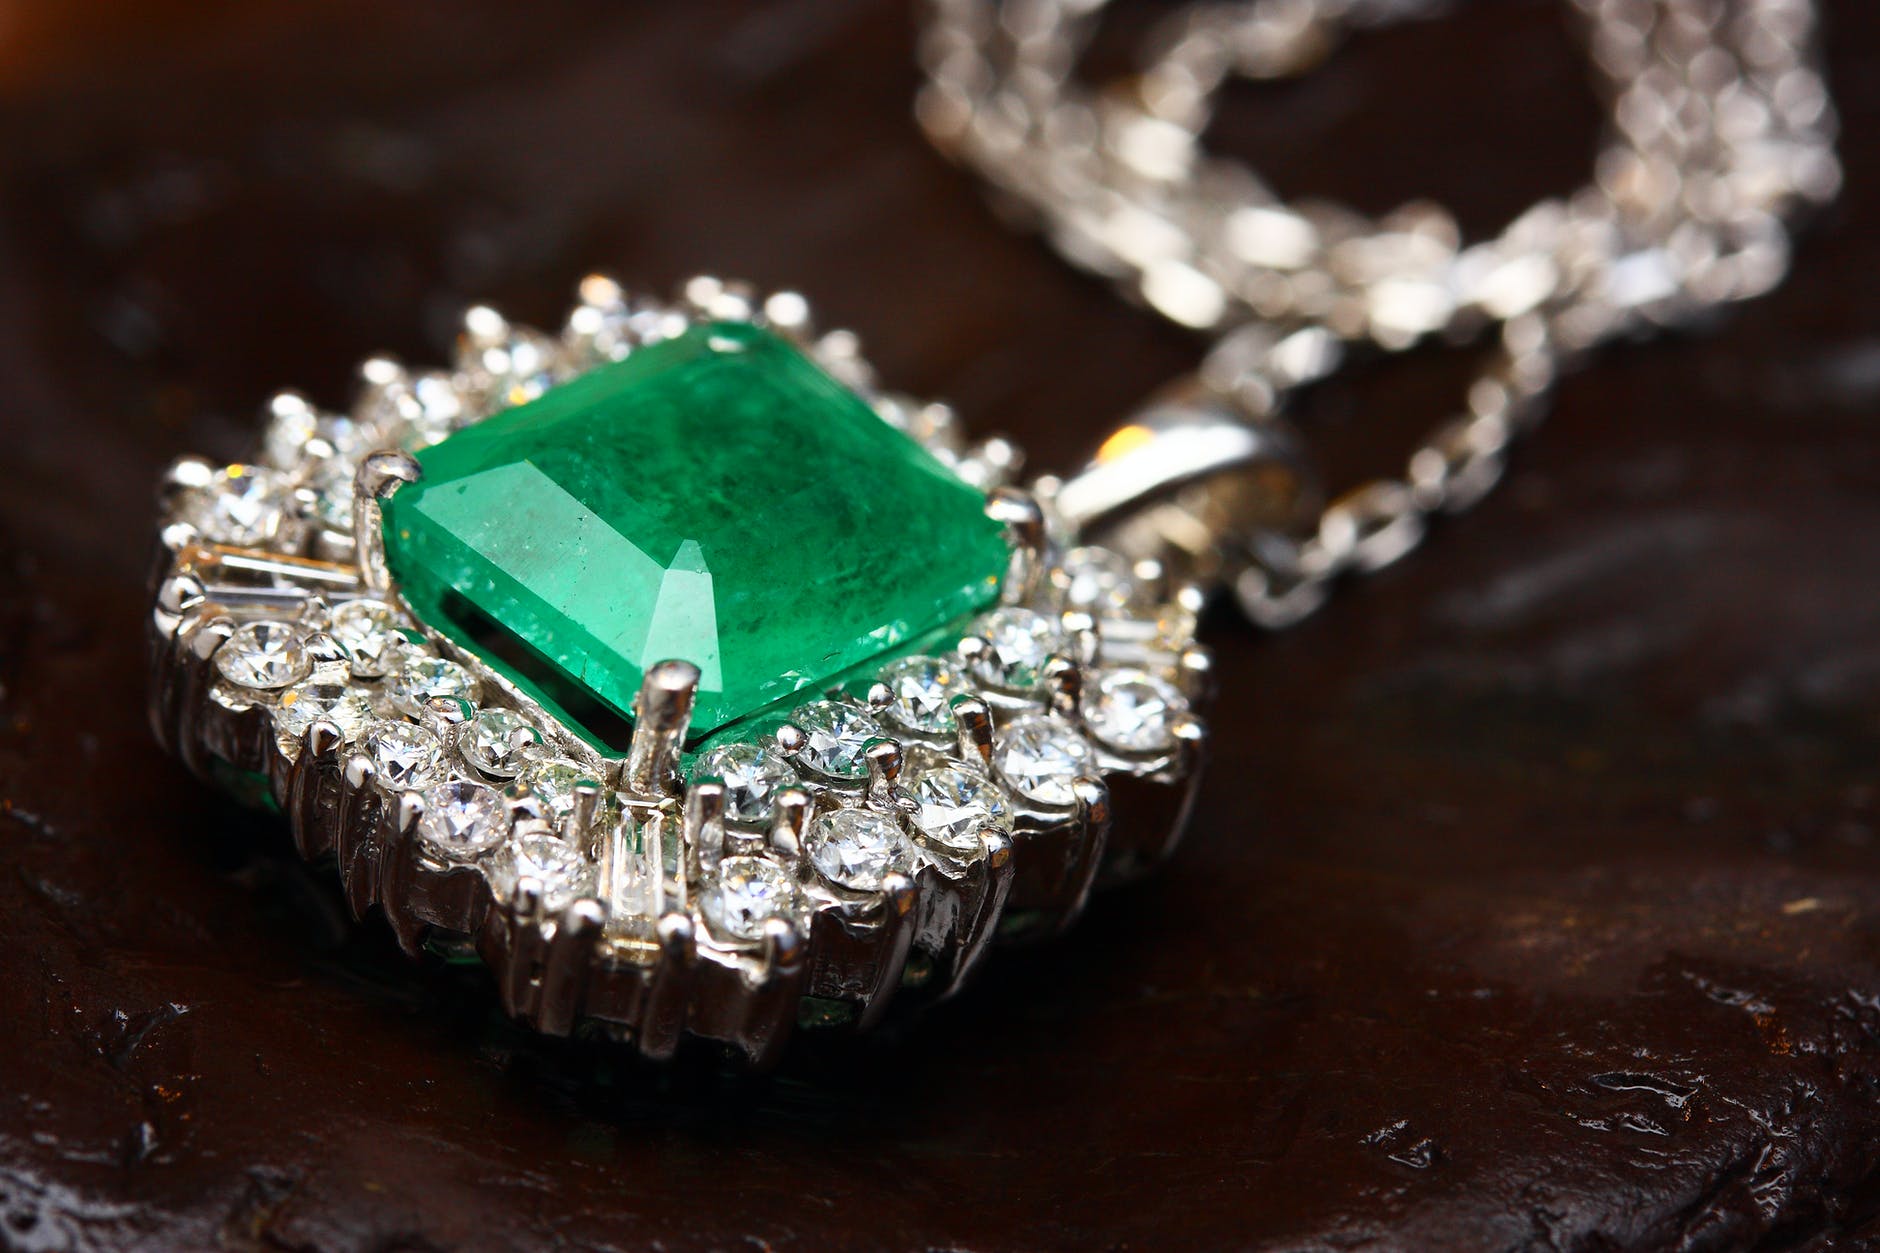 An emerald necklace | Source: Pexels